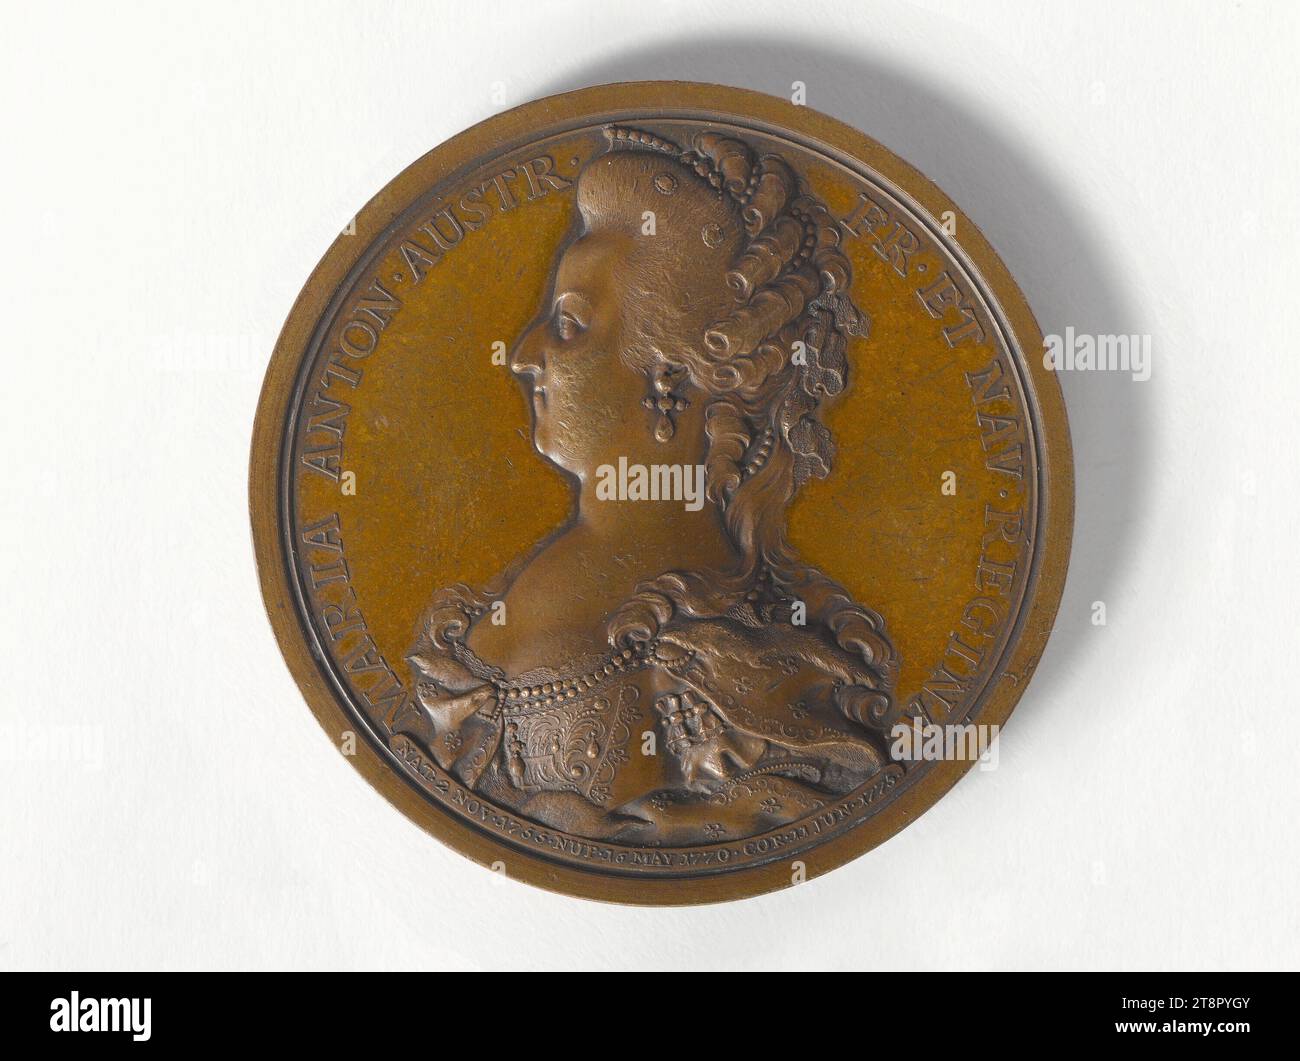 Execution of Marie-Antoinette, October 16, 1793, Küchler, Conrad Heinrich, Medal Engraver, Array, Numismatic, Medal, Dimensions - Work: Diameter: 4.8 cm, Weight (type size): 60.06 g Stock Photo